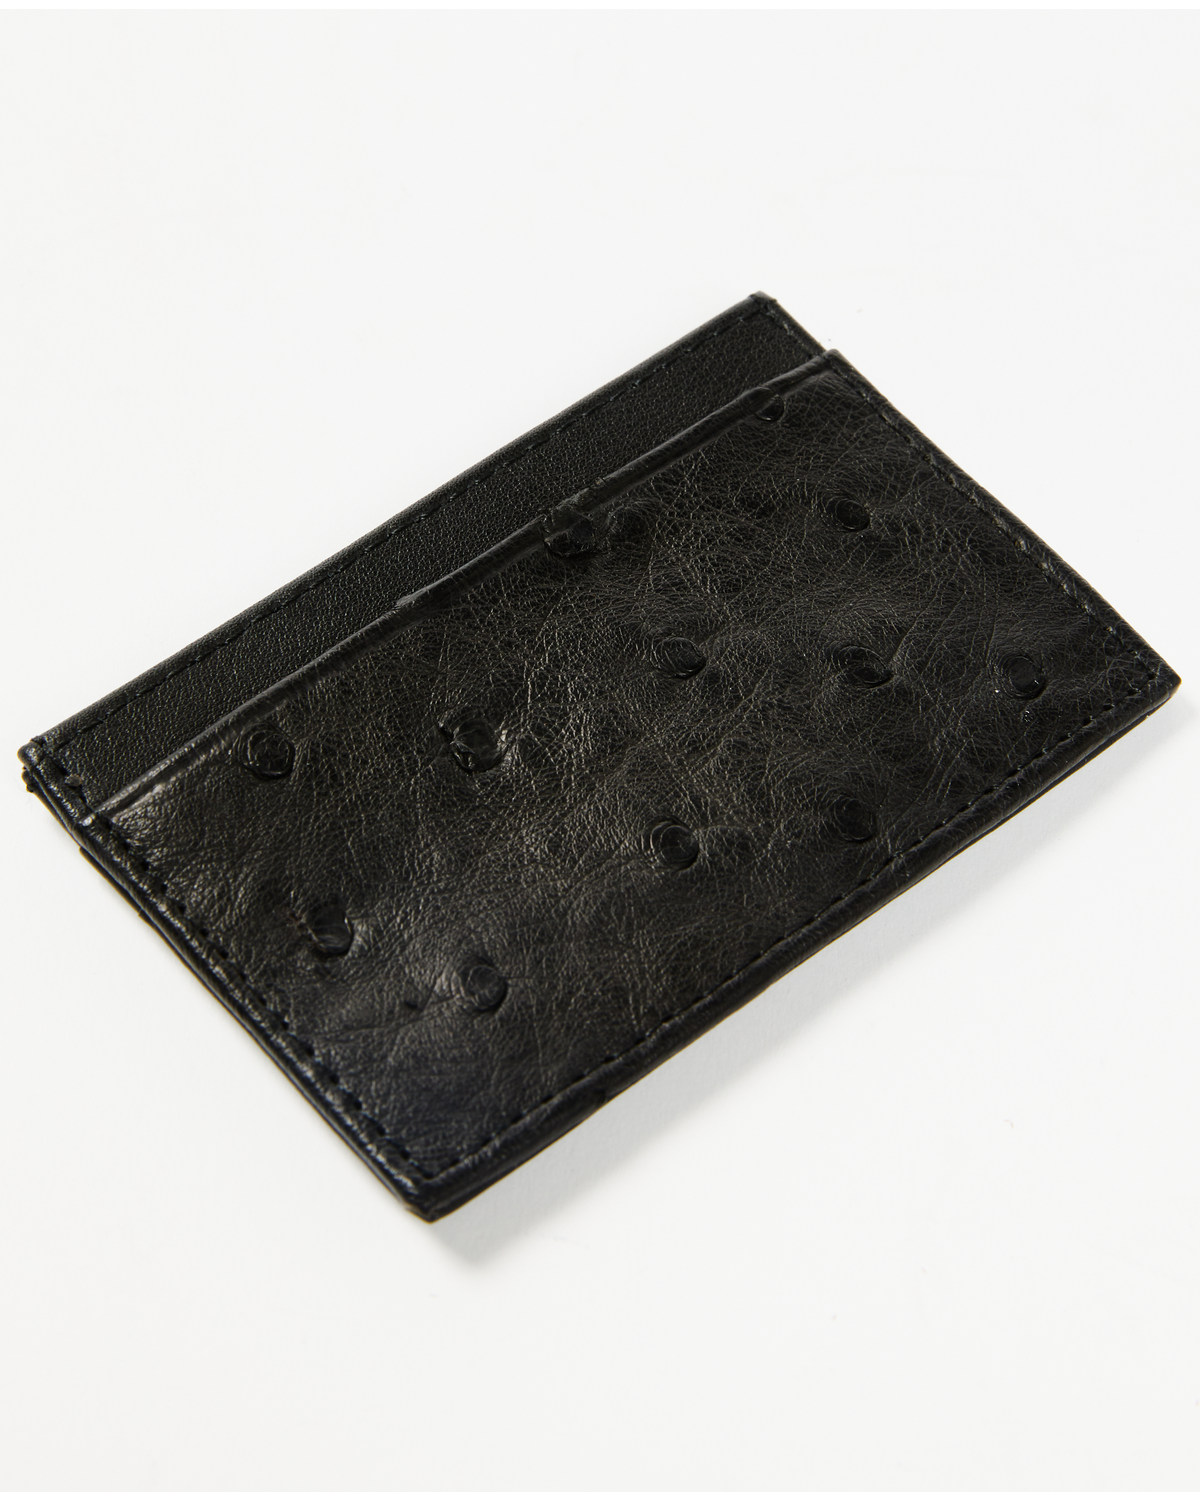 Cody James Men's Exotic Ostrich Leather Credit Card Wallet